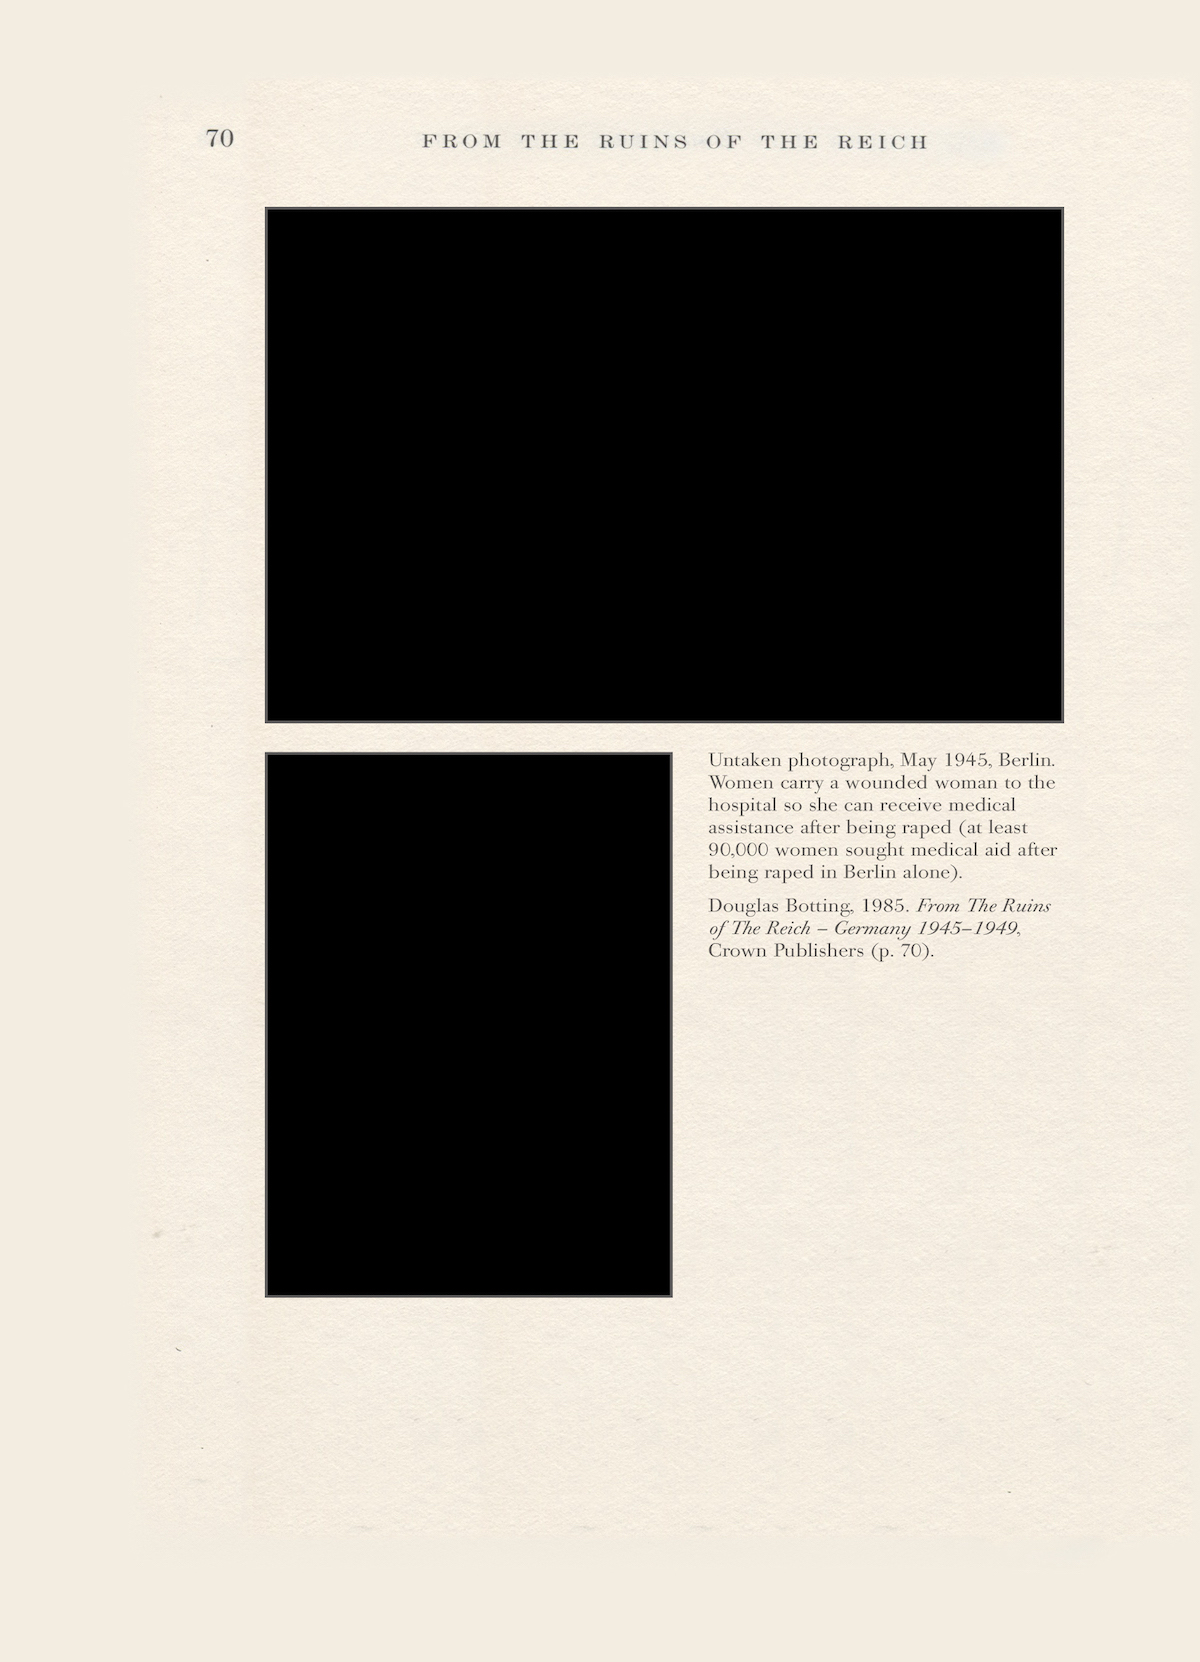 A page of a book with two blacked out photographs with 